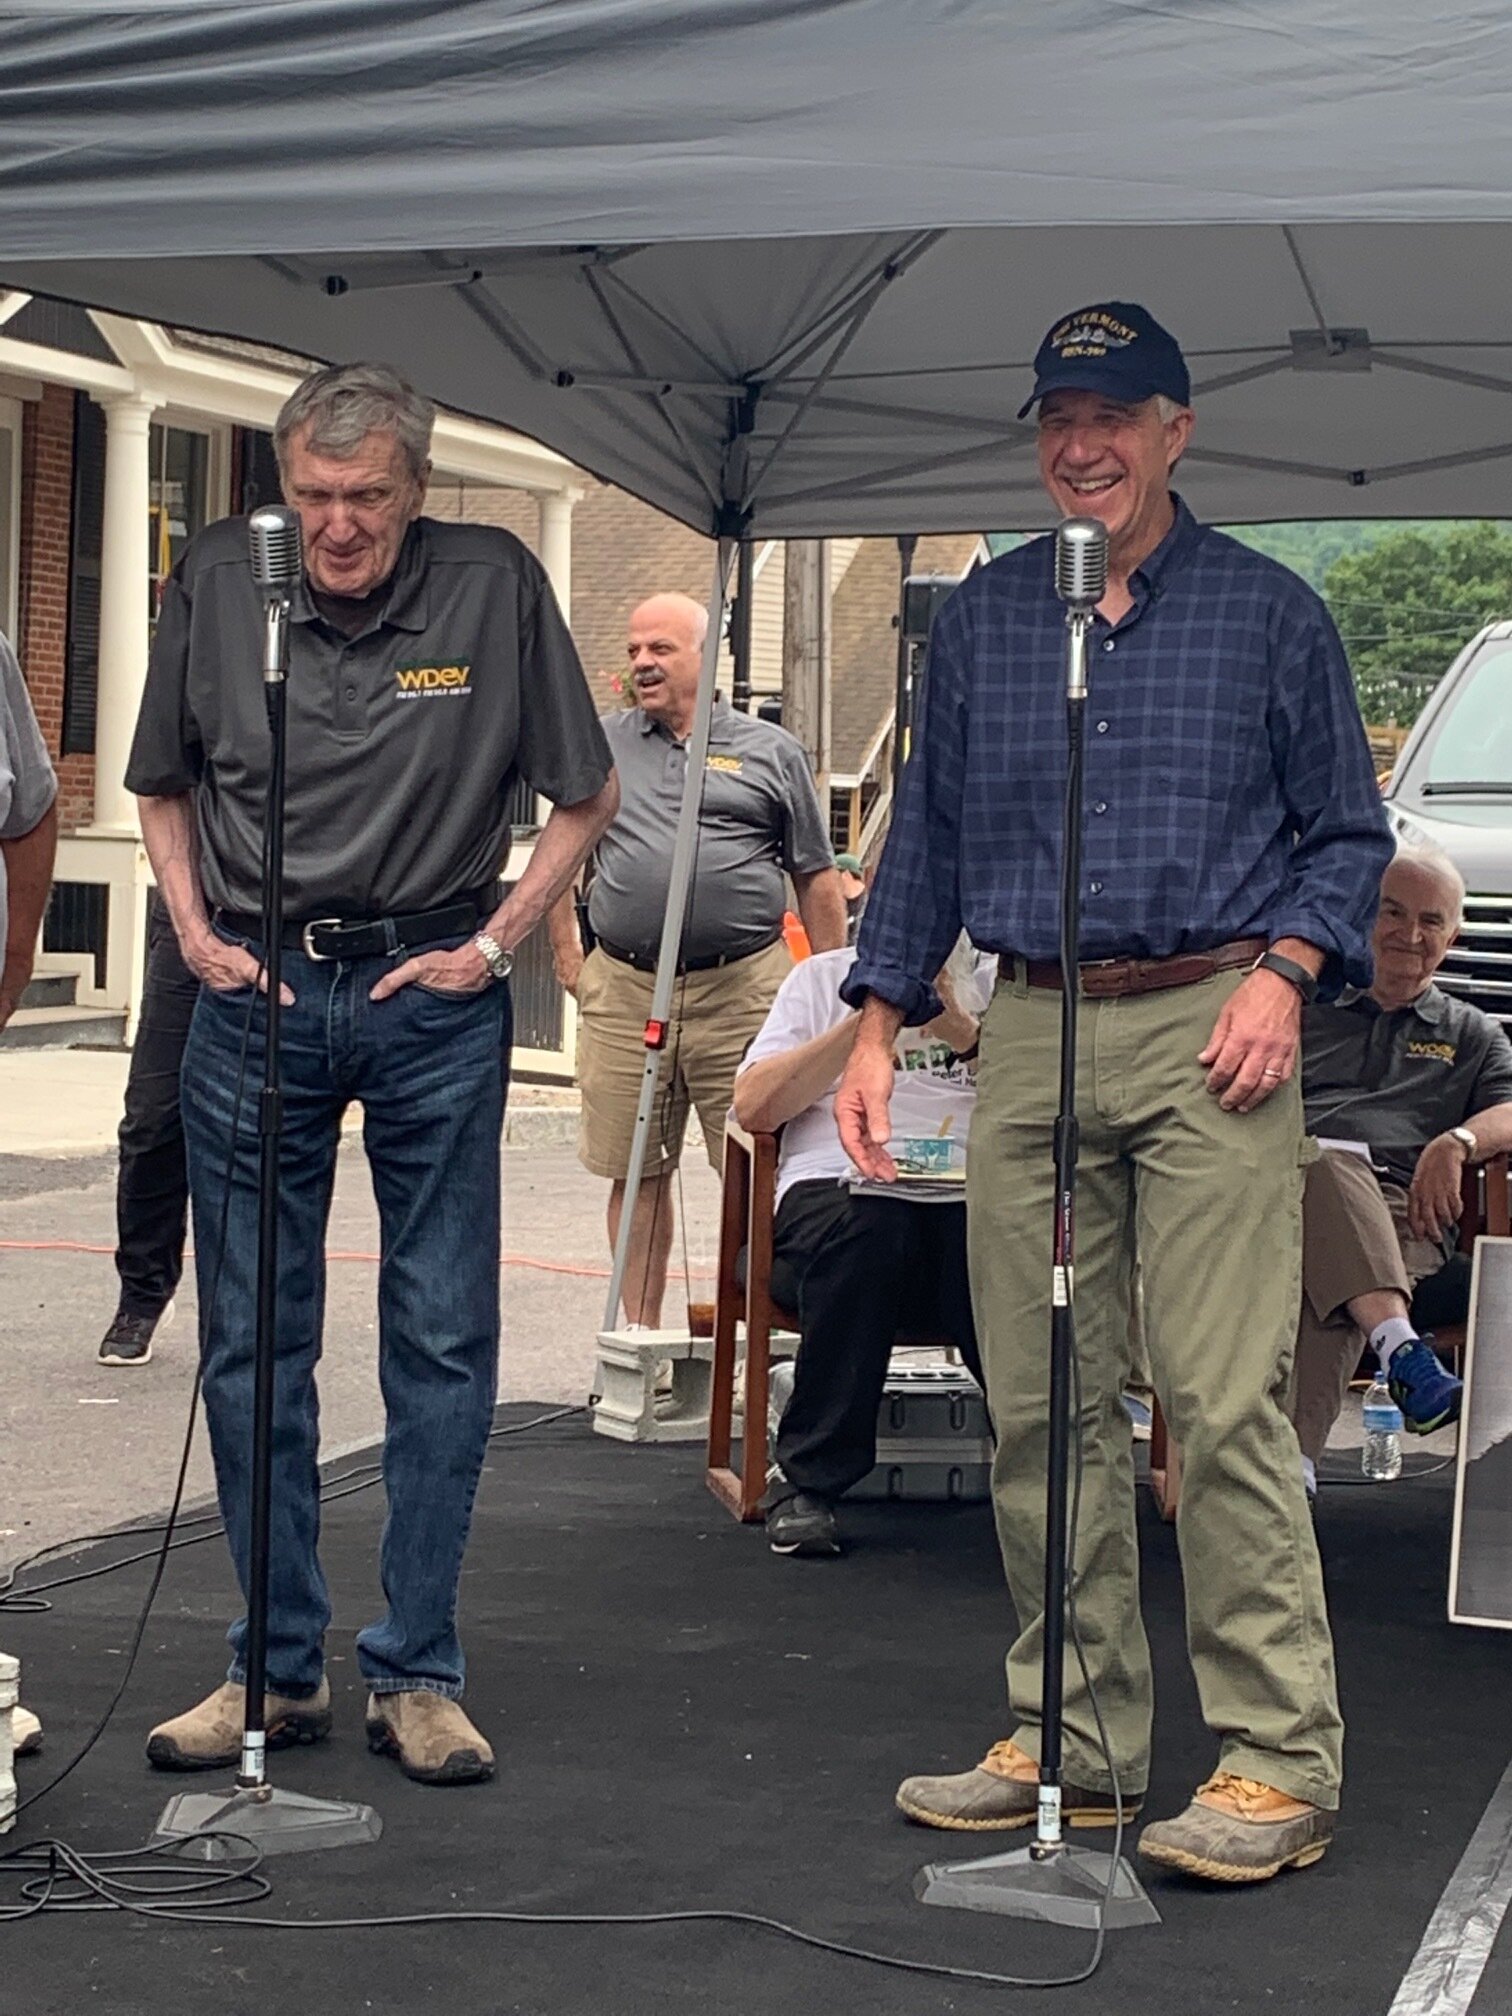   Gov. Phil Scott makes his second stop in Waterbury in a week. After riding in the Not Quite Independence Day parade July 10 with WDEV's Ken Squier, Scott returned for the WDEV bash and an on-air visit with host Ken Beardsley and Squier. Photo by Li